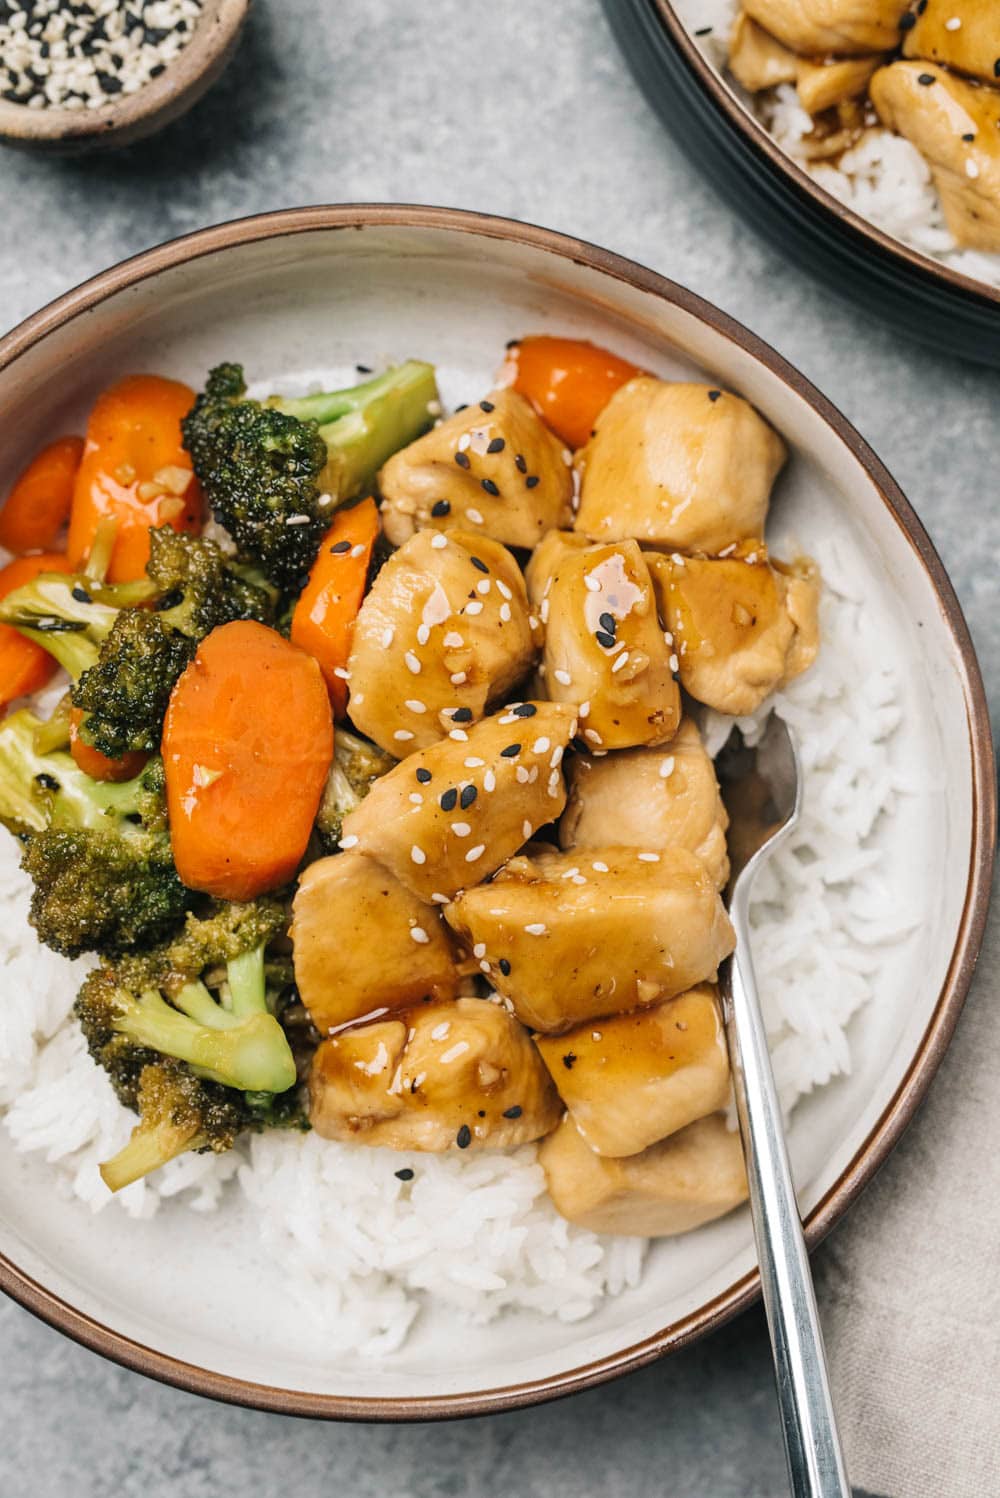 A healthy chicken teriyaki bowl with rice, chicken, broccoli, and carrots on a concrete background.